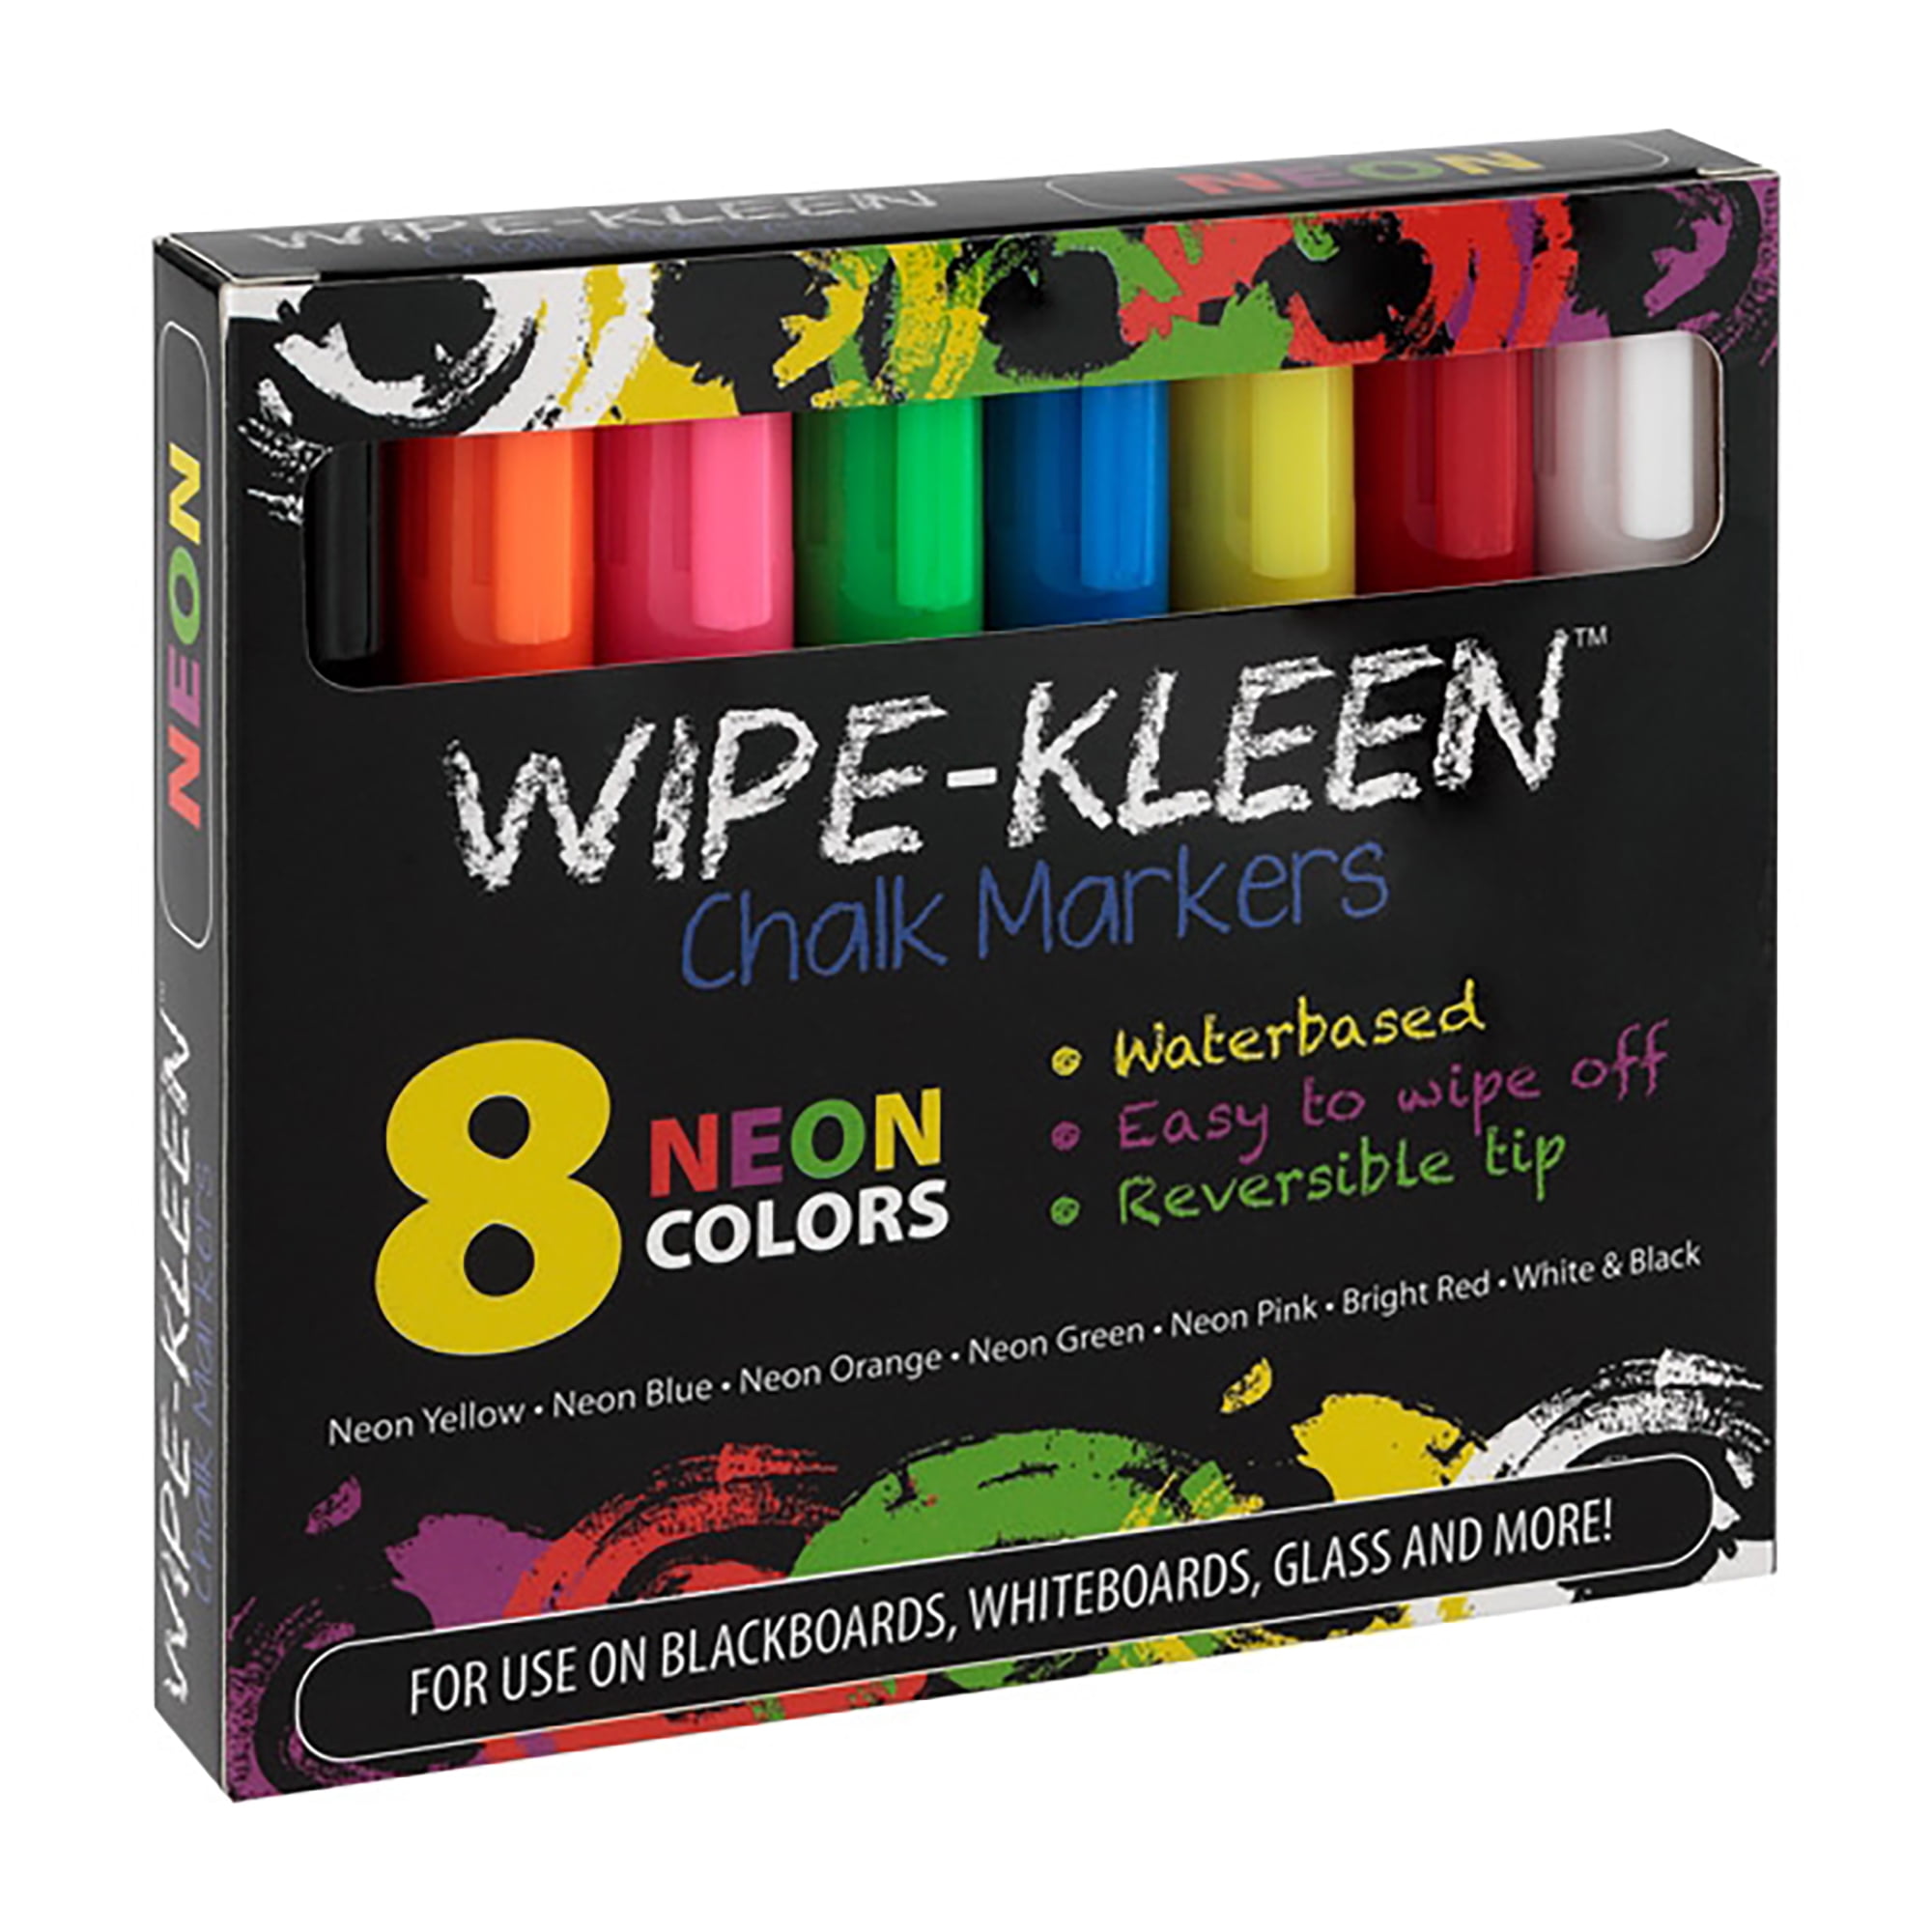 Creative Mark Wipe-kleen Liquid Chalk Markers Neon Color- Set of 8 - for Bistro Signs, Blackboard, Whiteboard & Glass- Reversible Bullet or Chisel